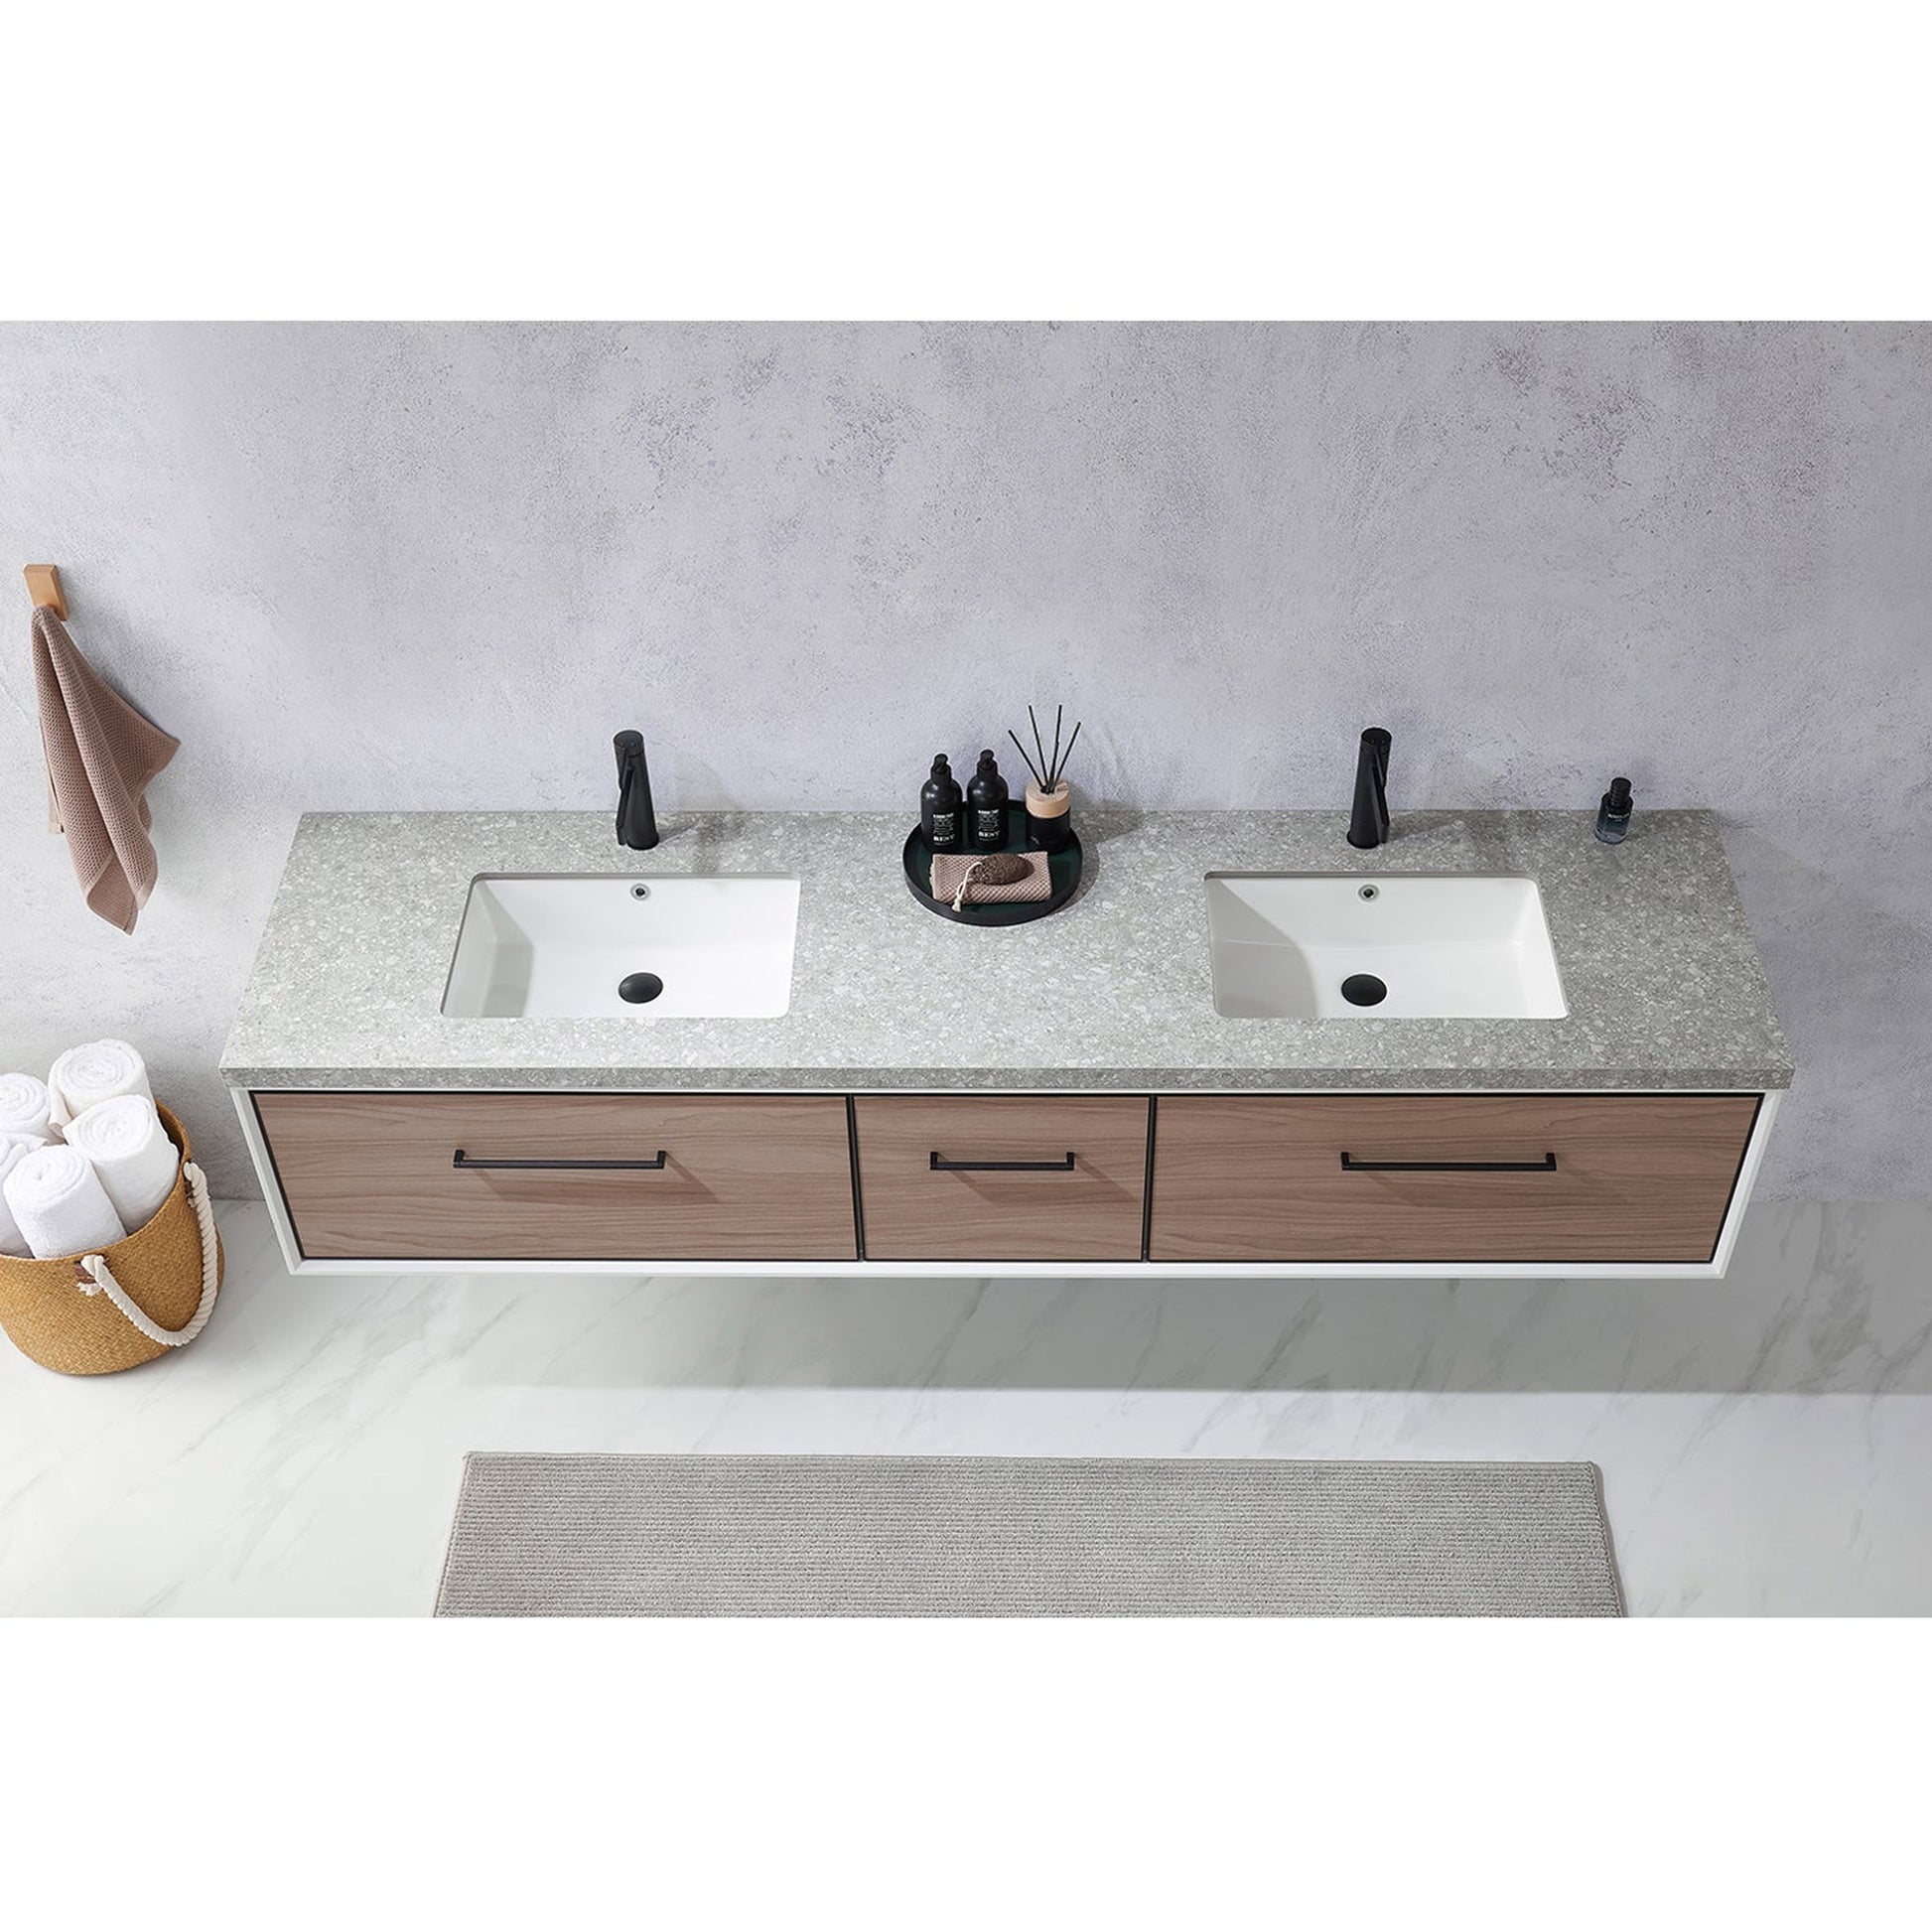 Vinnova Caparroso 84" Double Sink Floating Bathroom Vanity In Light Walnut And Matte Black Hardware Finish With Grey Sintered Stone Top